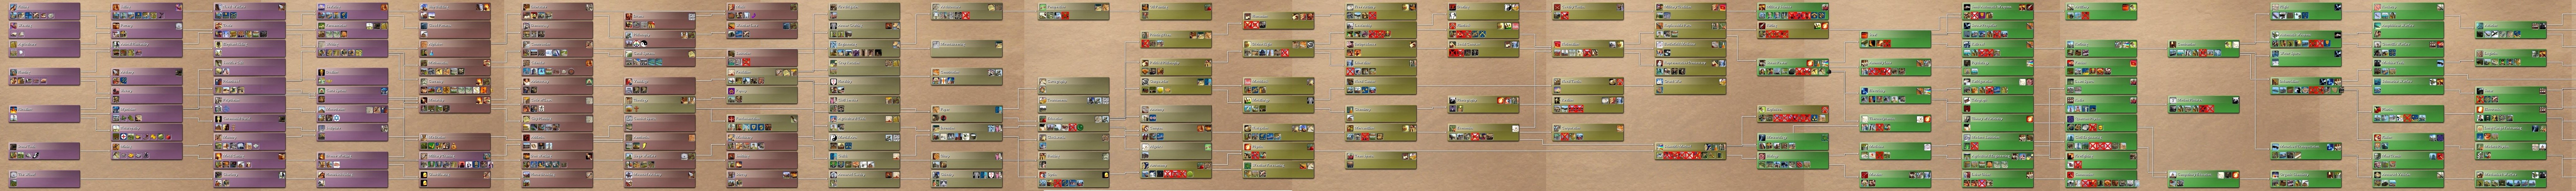 Rise Of Mankind 2.8 Tech Tree